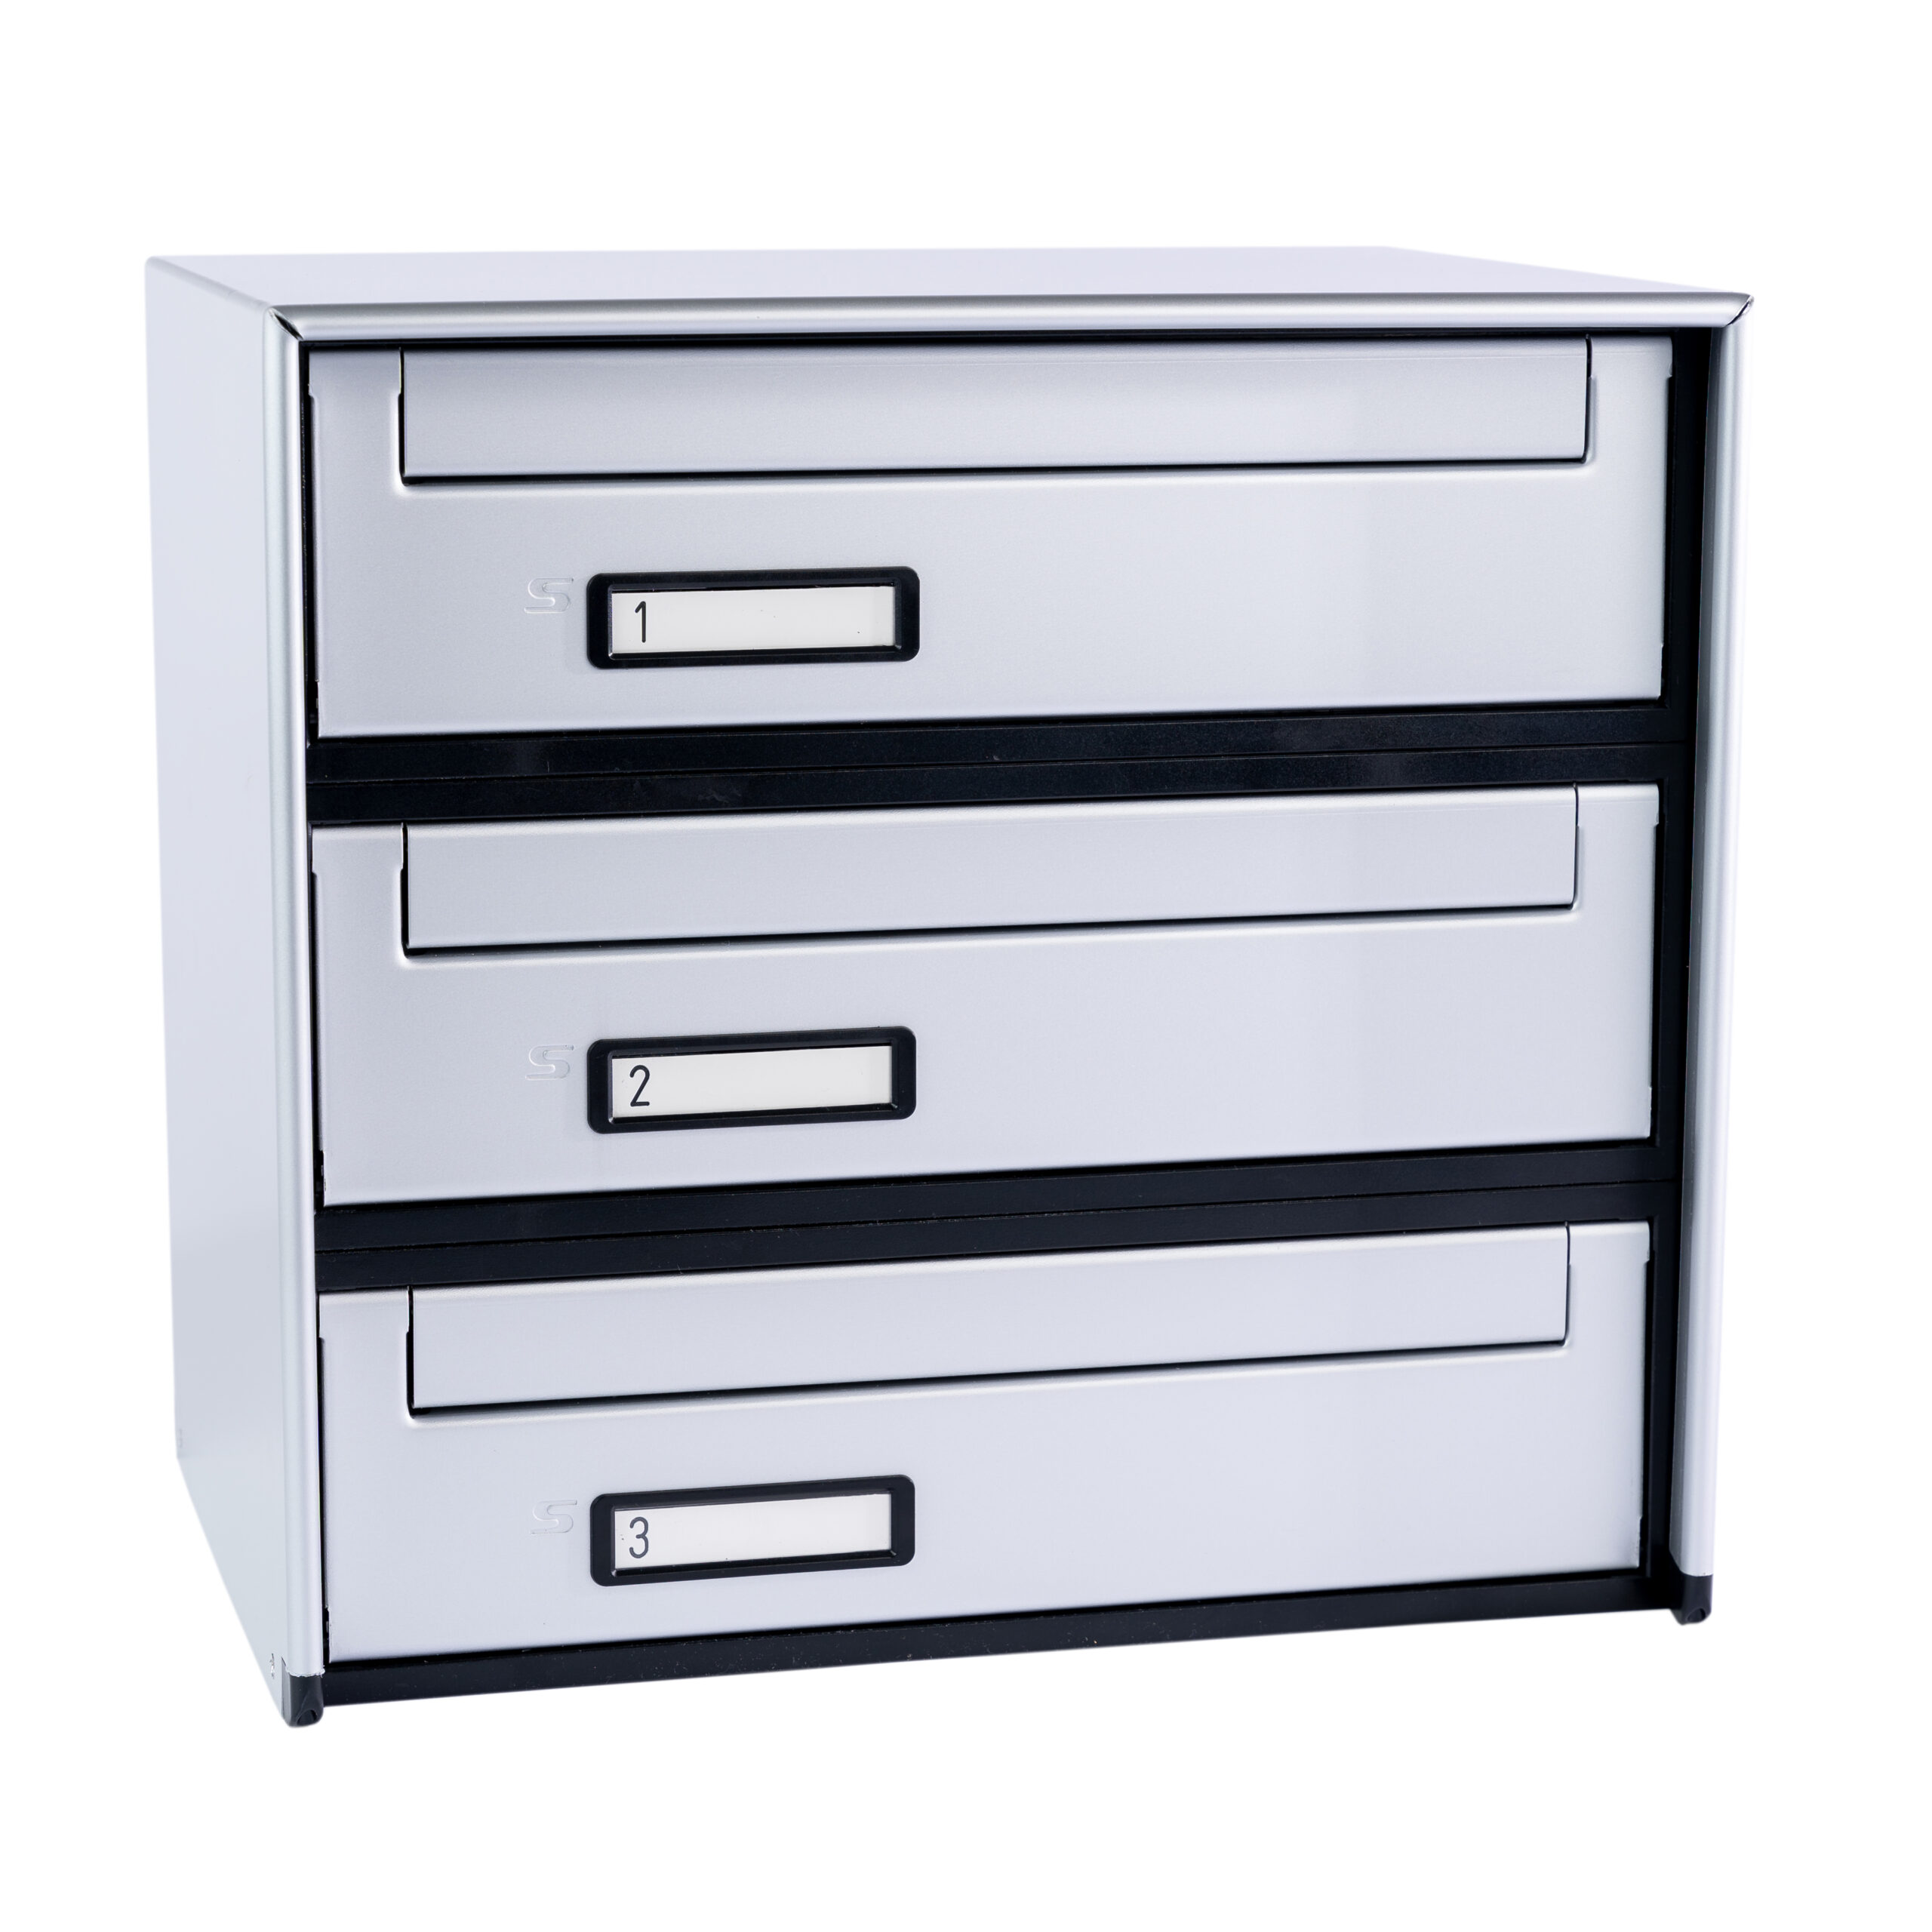 SC6 standard modular letterbox units with rear mail collection - 3 mailboxes